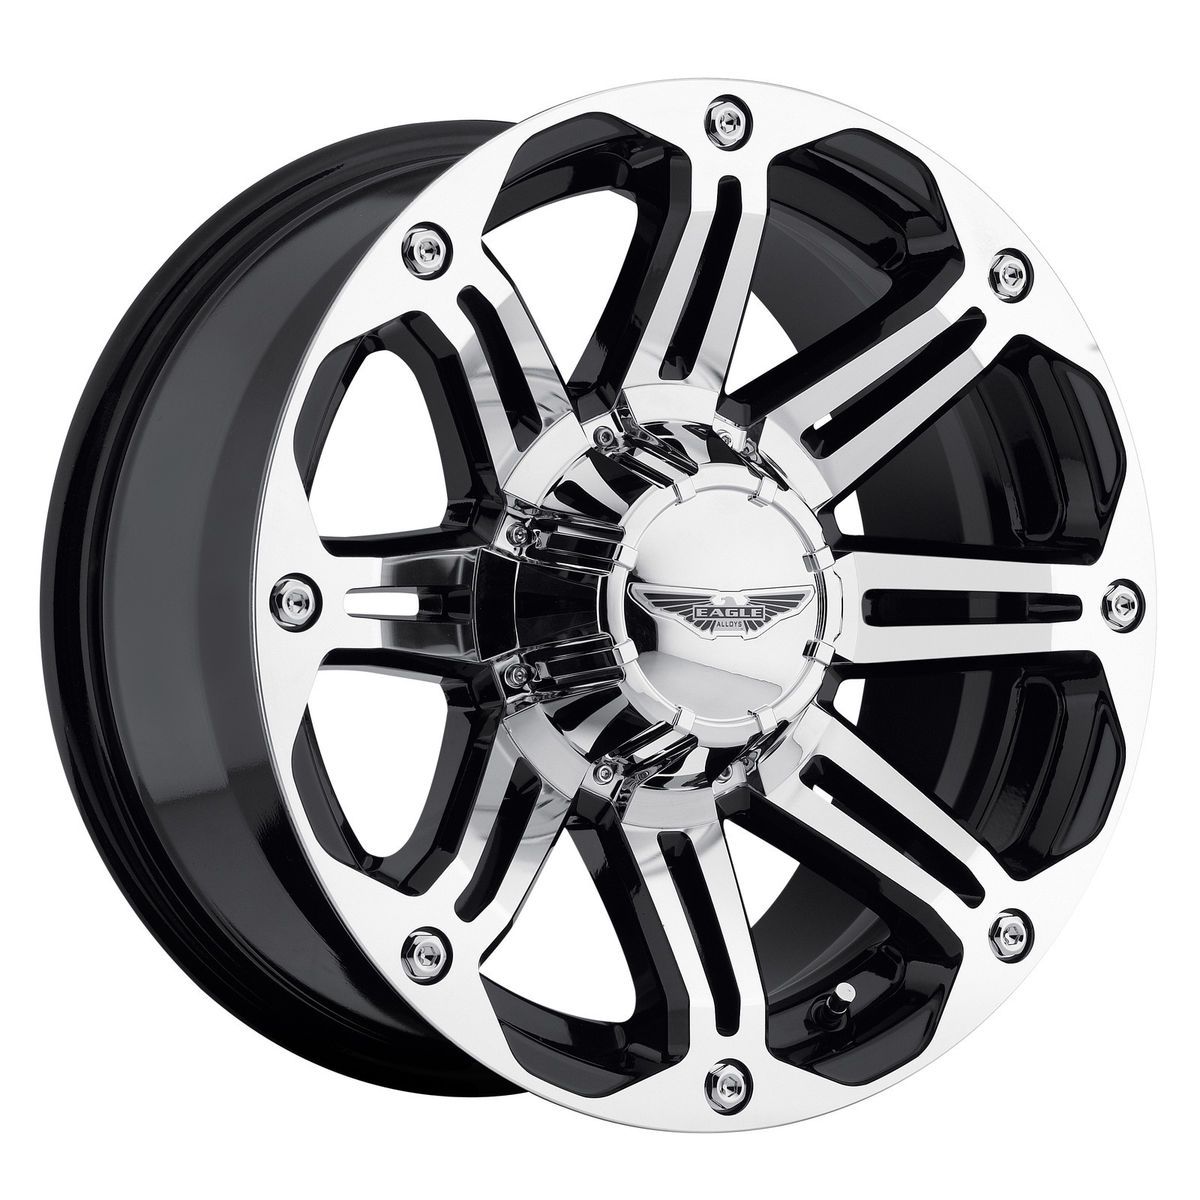 CPP American Eagle 050 Wheels Rims 20x9 Fits Chevy GMC Dodge 2500